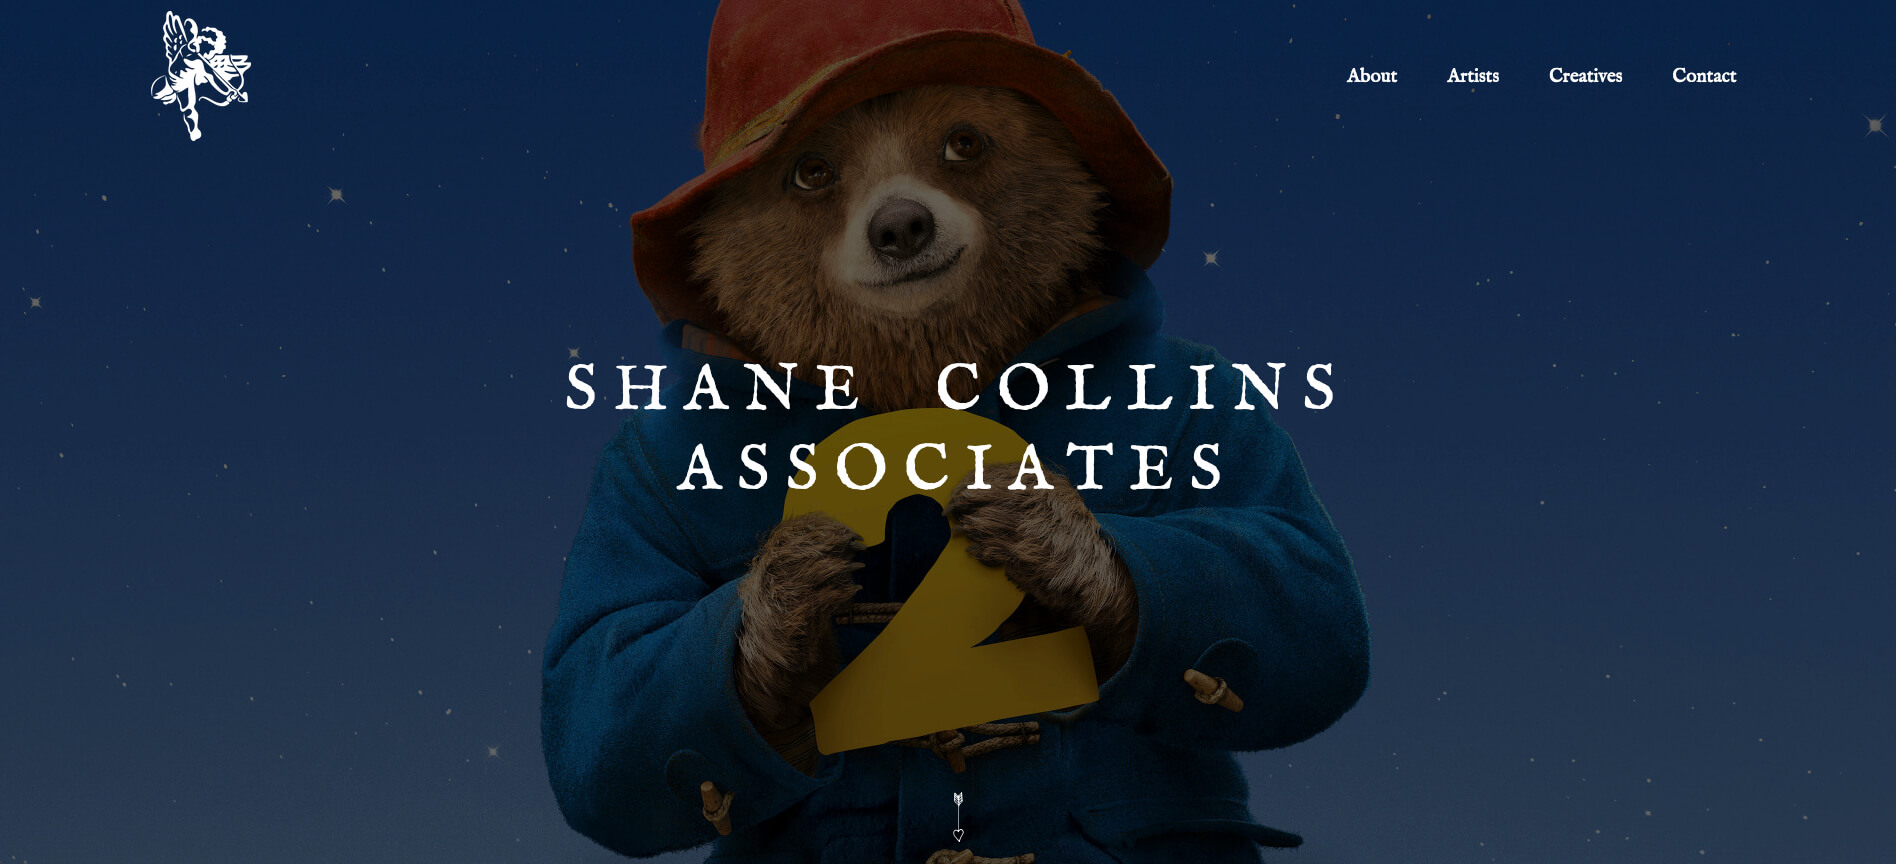 shane collins images